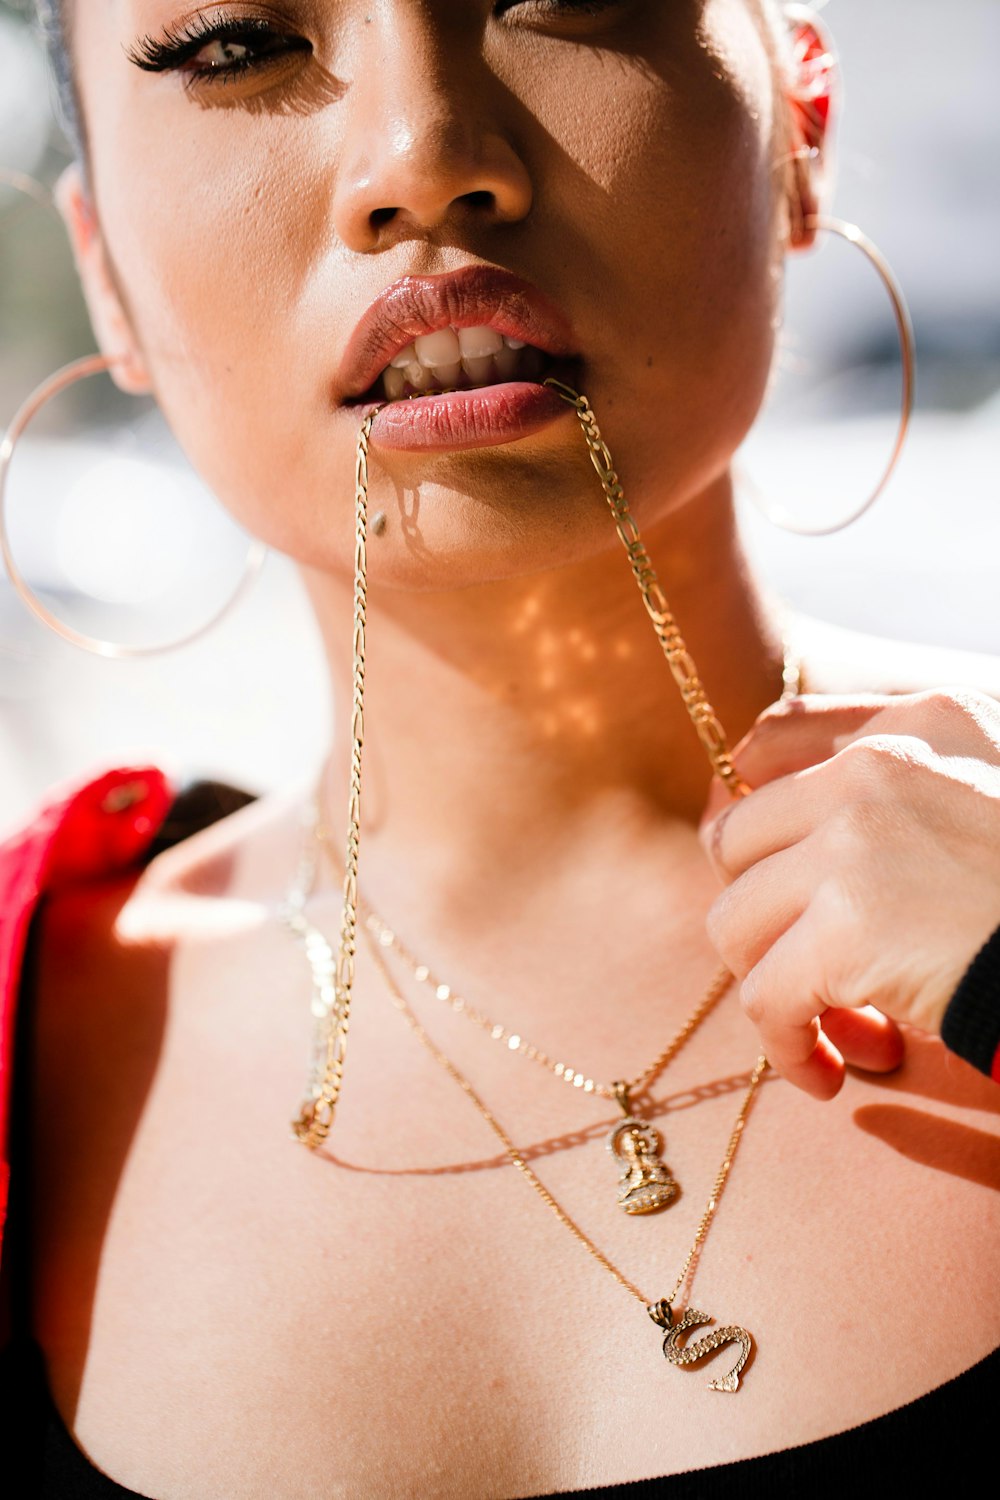 woman biting gold-colored necklace